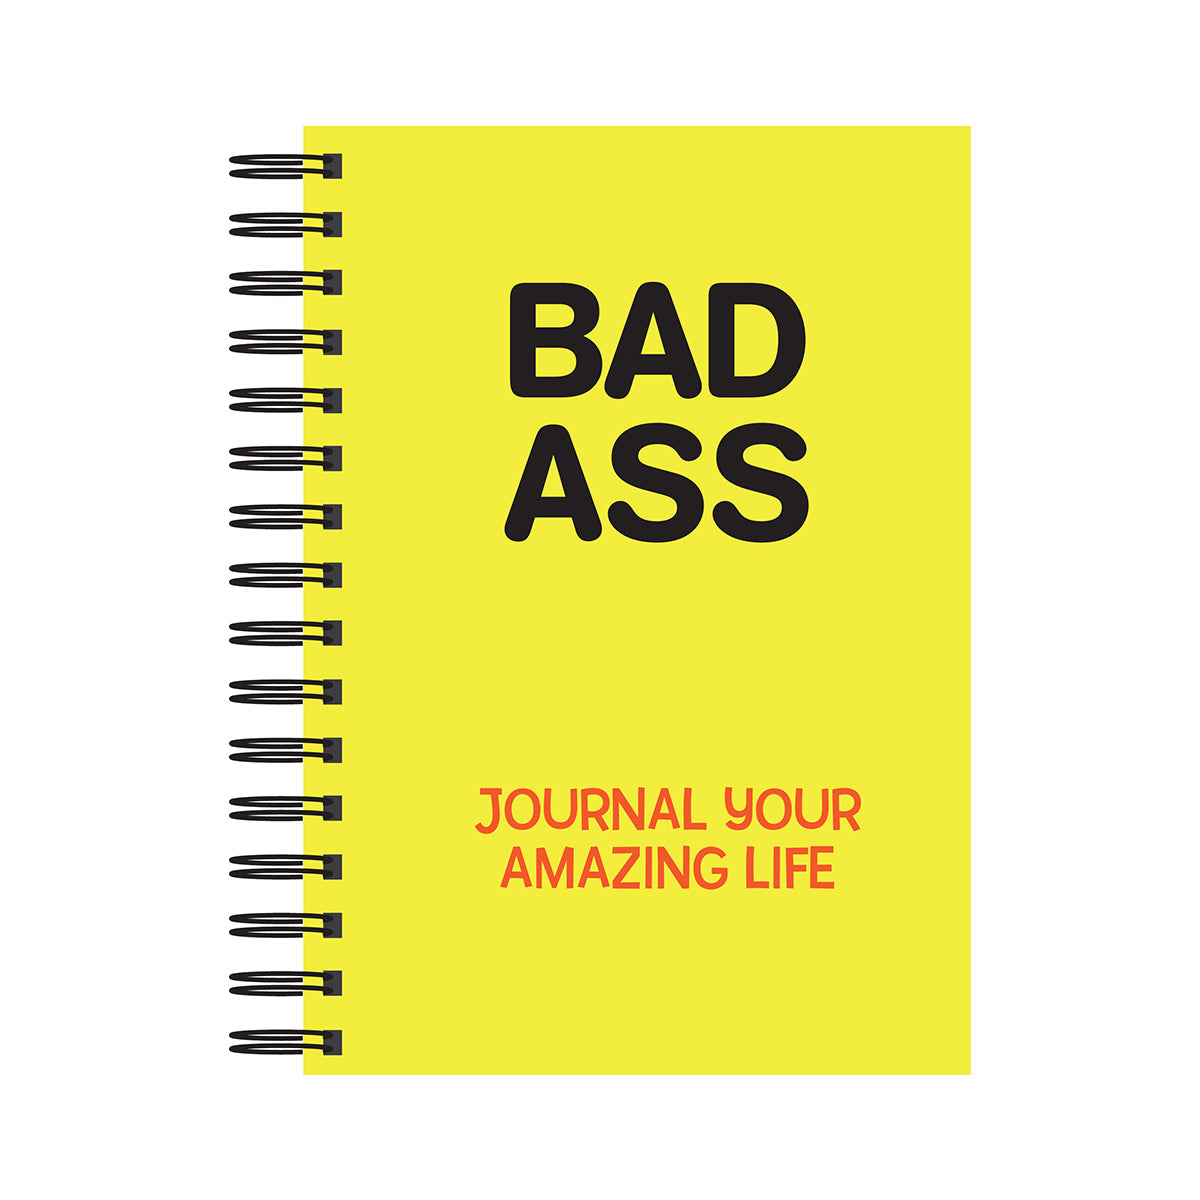 Bad Ass Journal Your Amazing Life Journal / Notebook / Diary